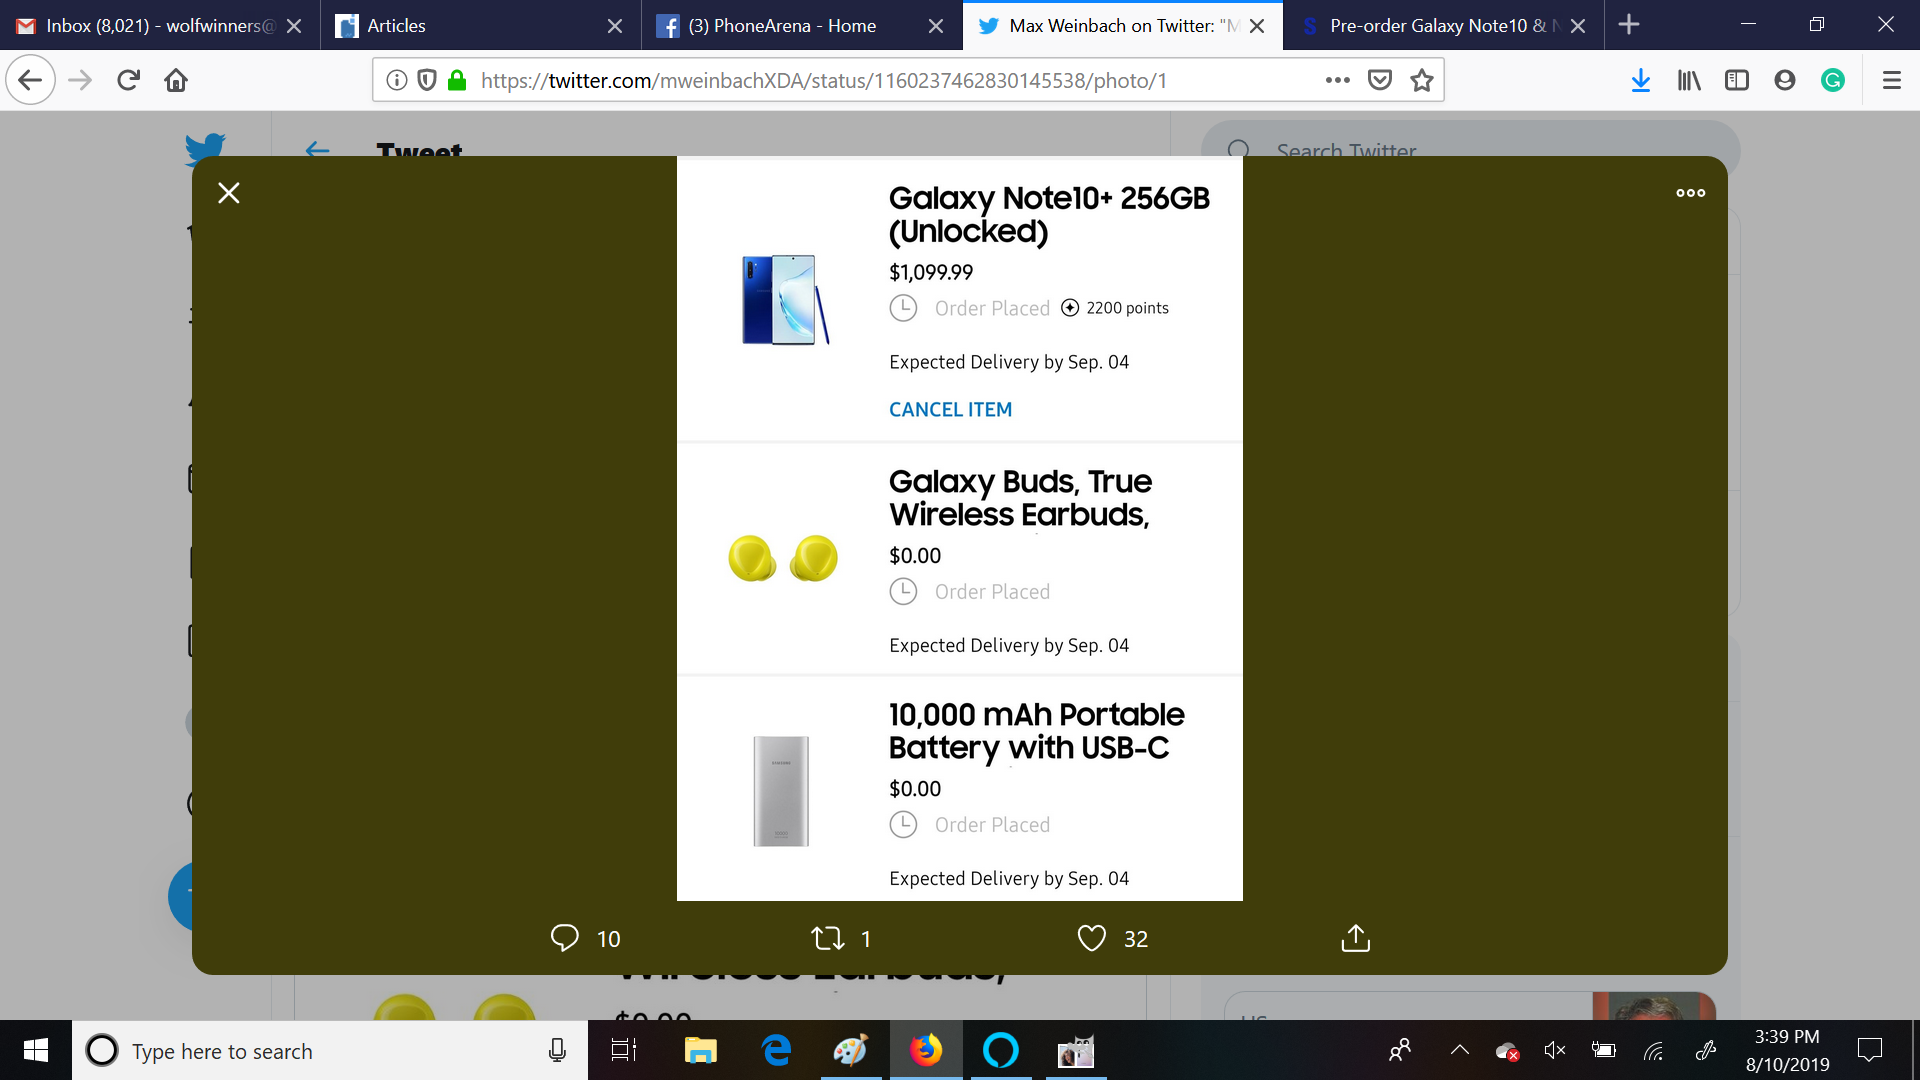 ...trying to sell them the new Galaxy Note 10 or Galaxy Note 10+ - Samsung angers its customers by advertising the Galaxy Note 10 line in the wrong place